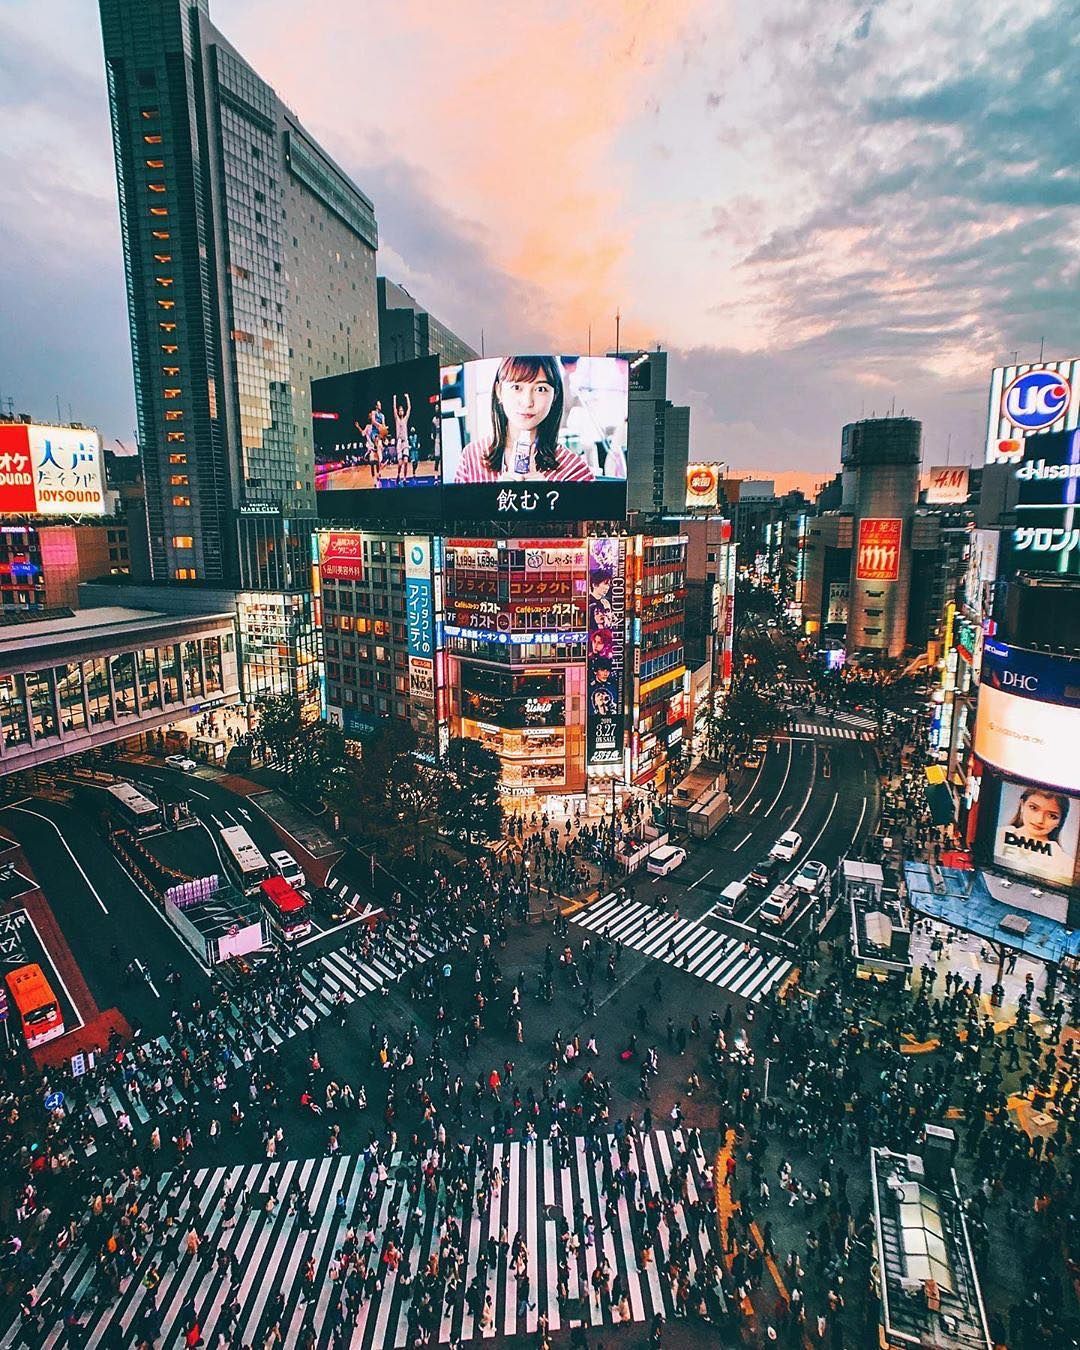 A beautiful picture of Shibuya Crossing at sunset